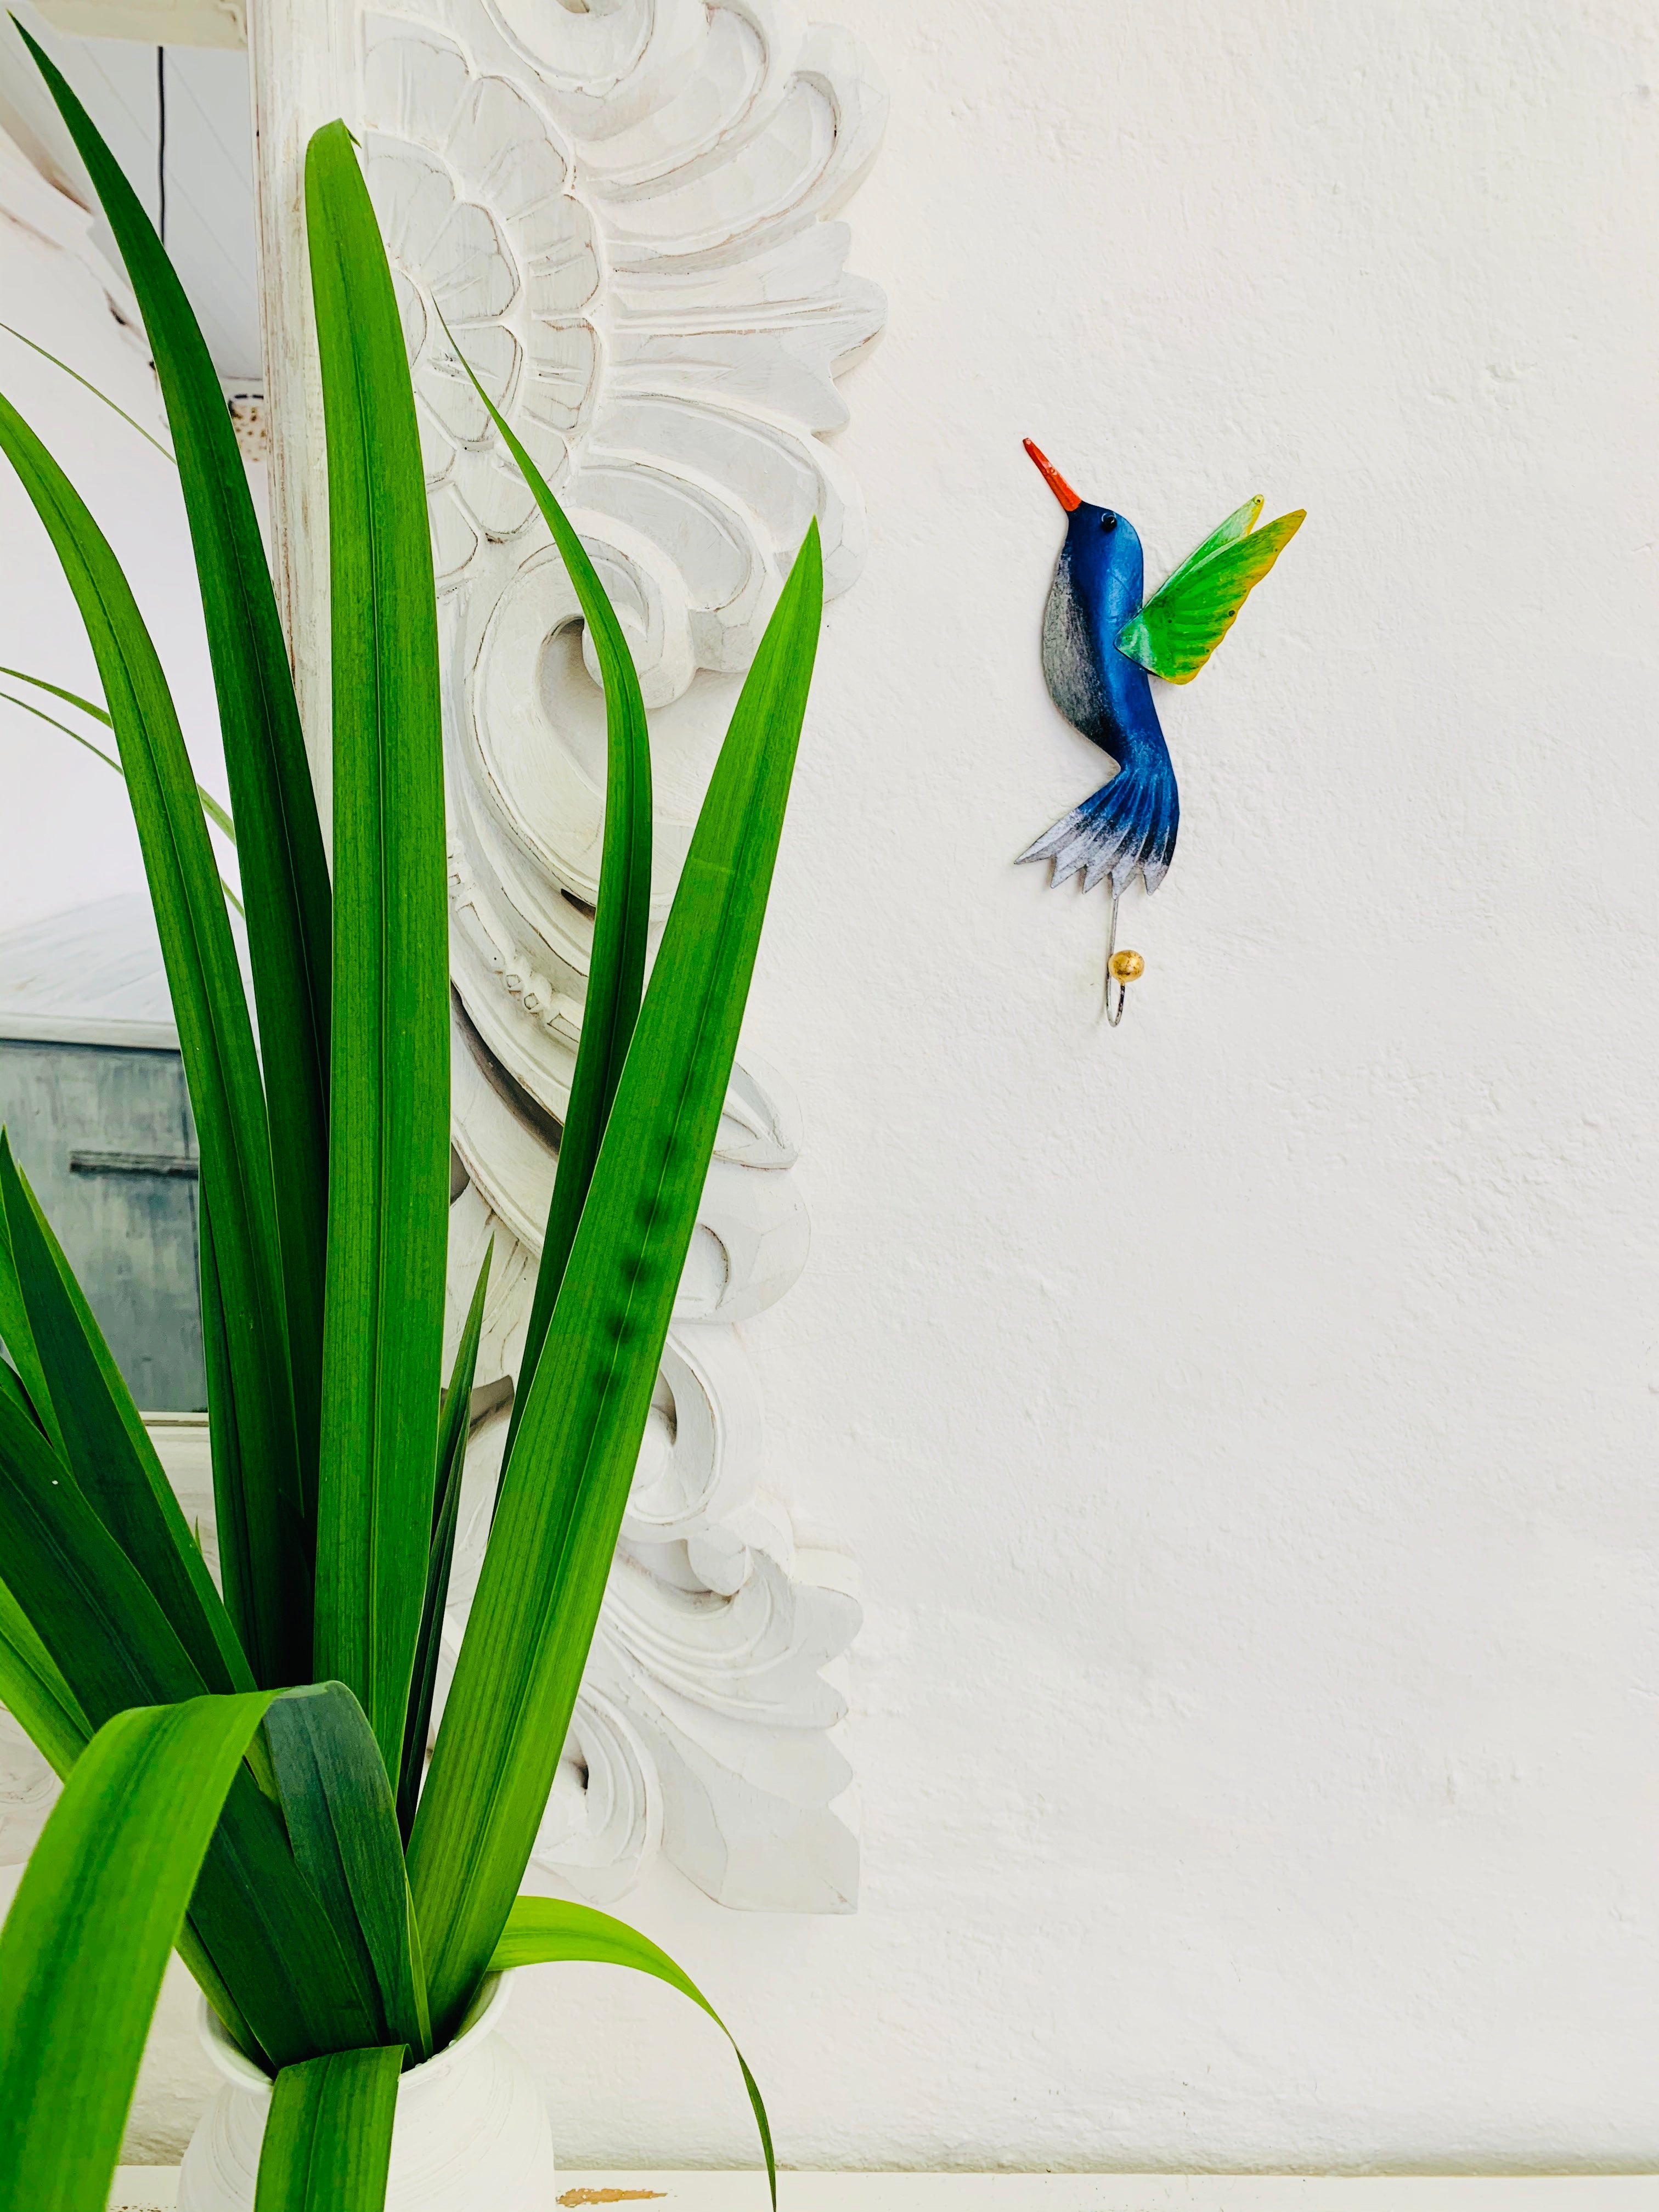 display view of metal humming bird hook next to a green plant